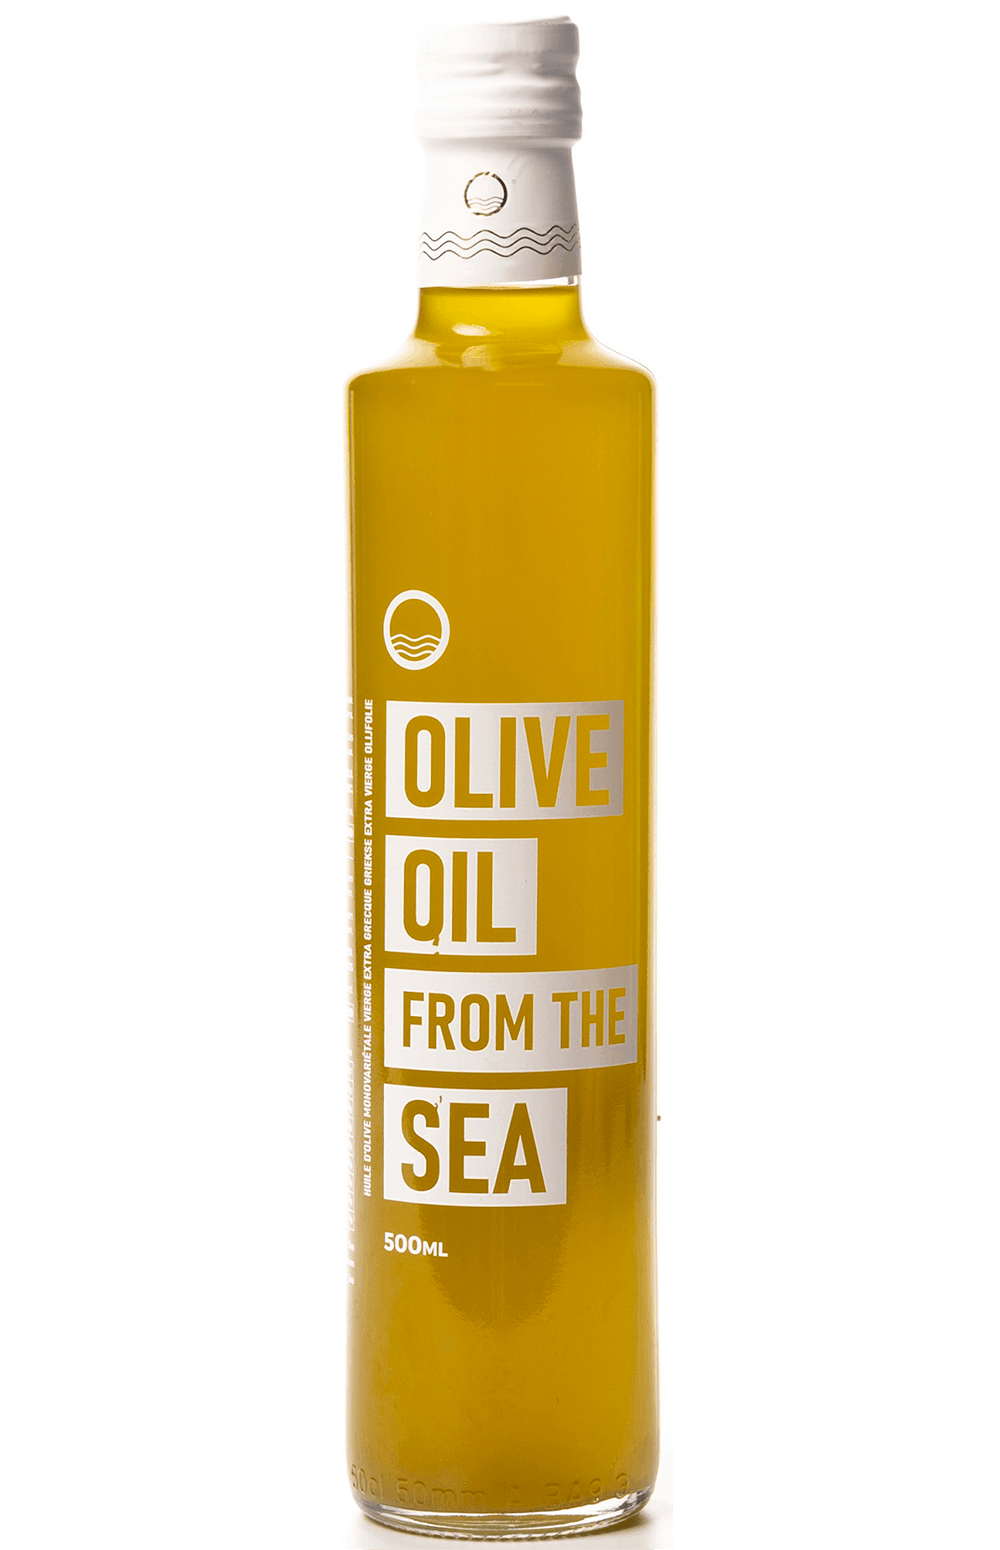 OLIVE OIL FROM THE SEA